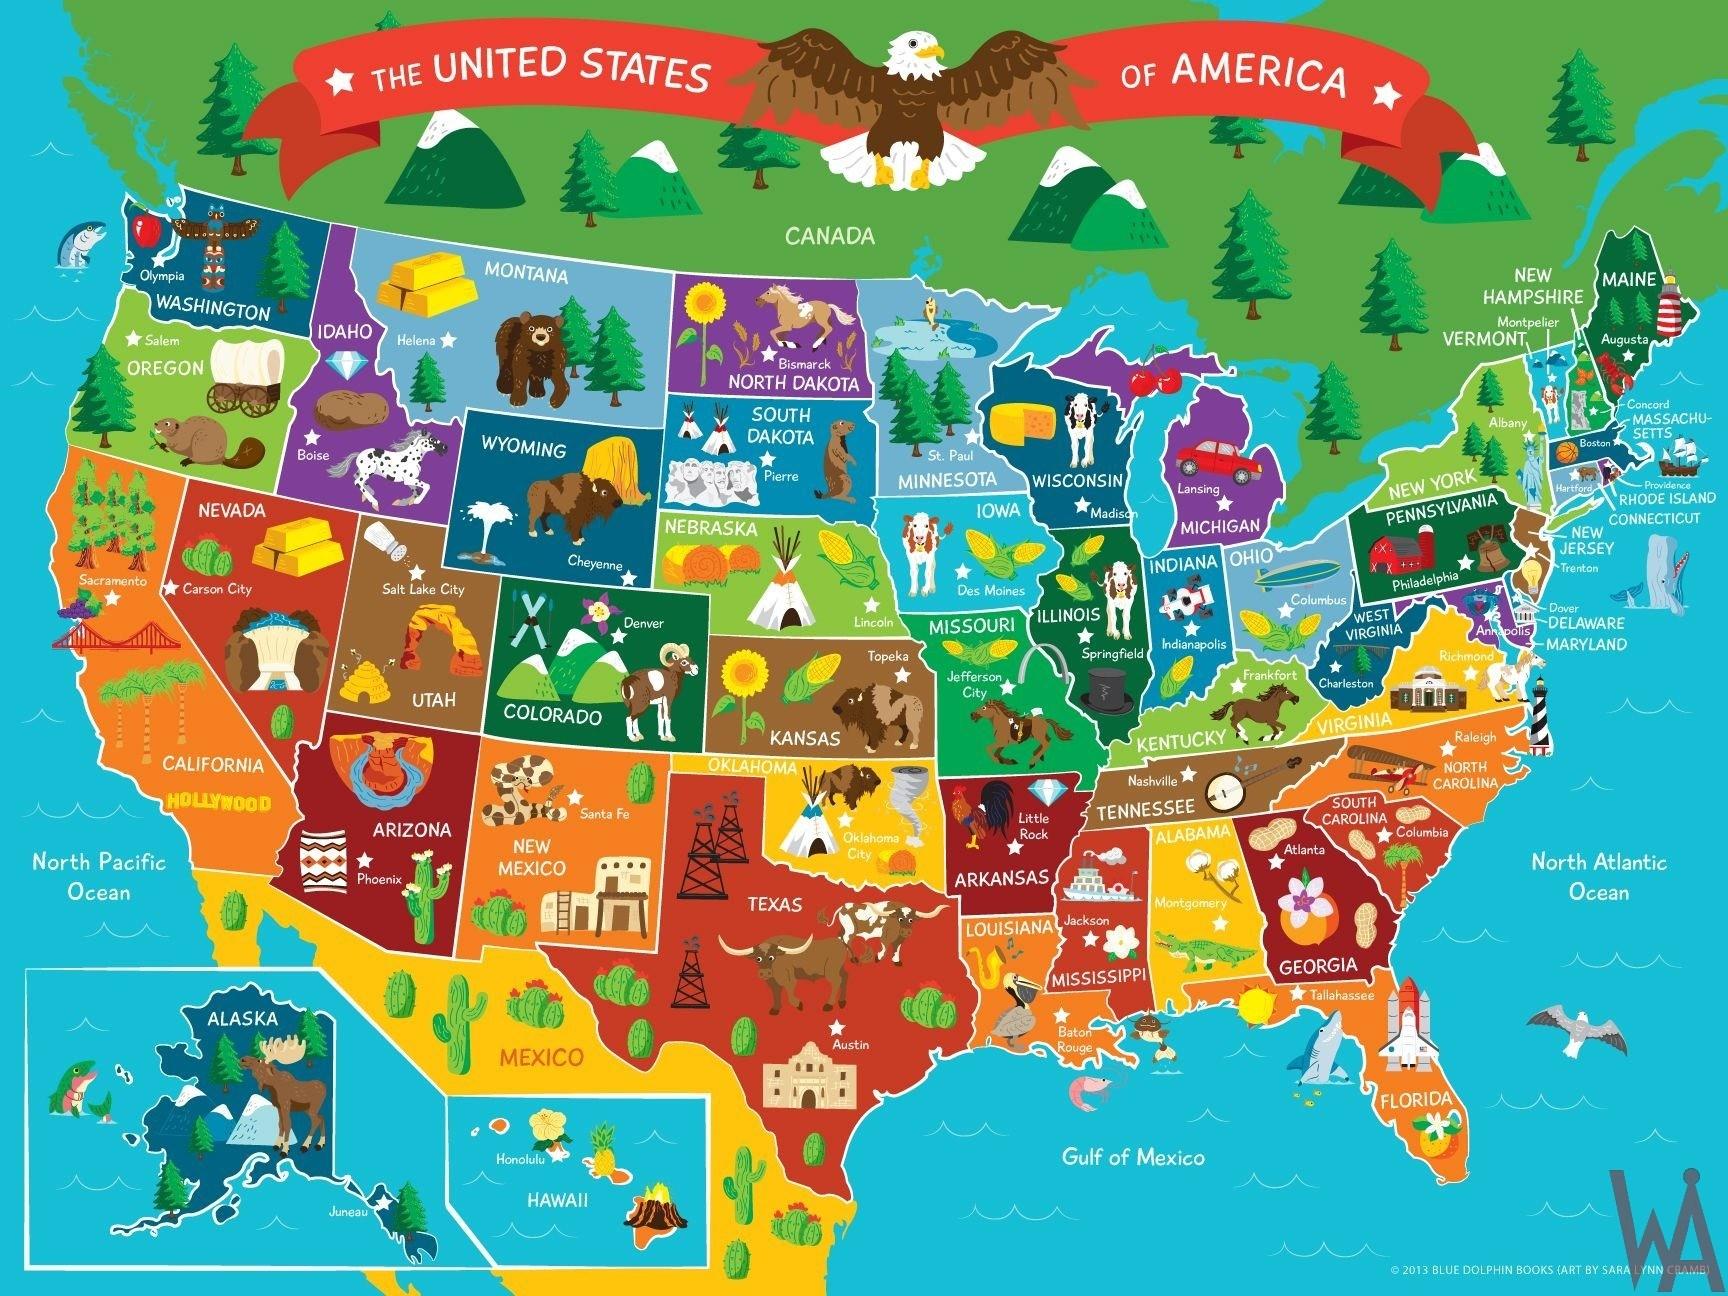 states to travel to for fun